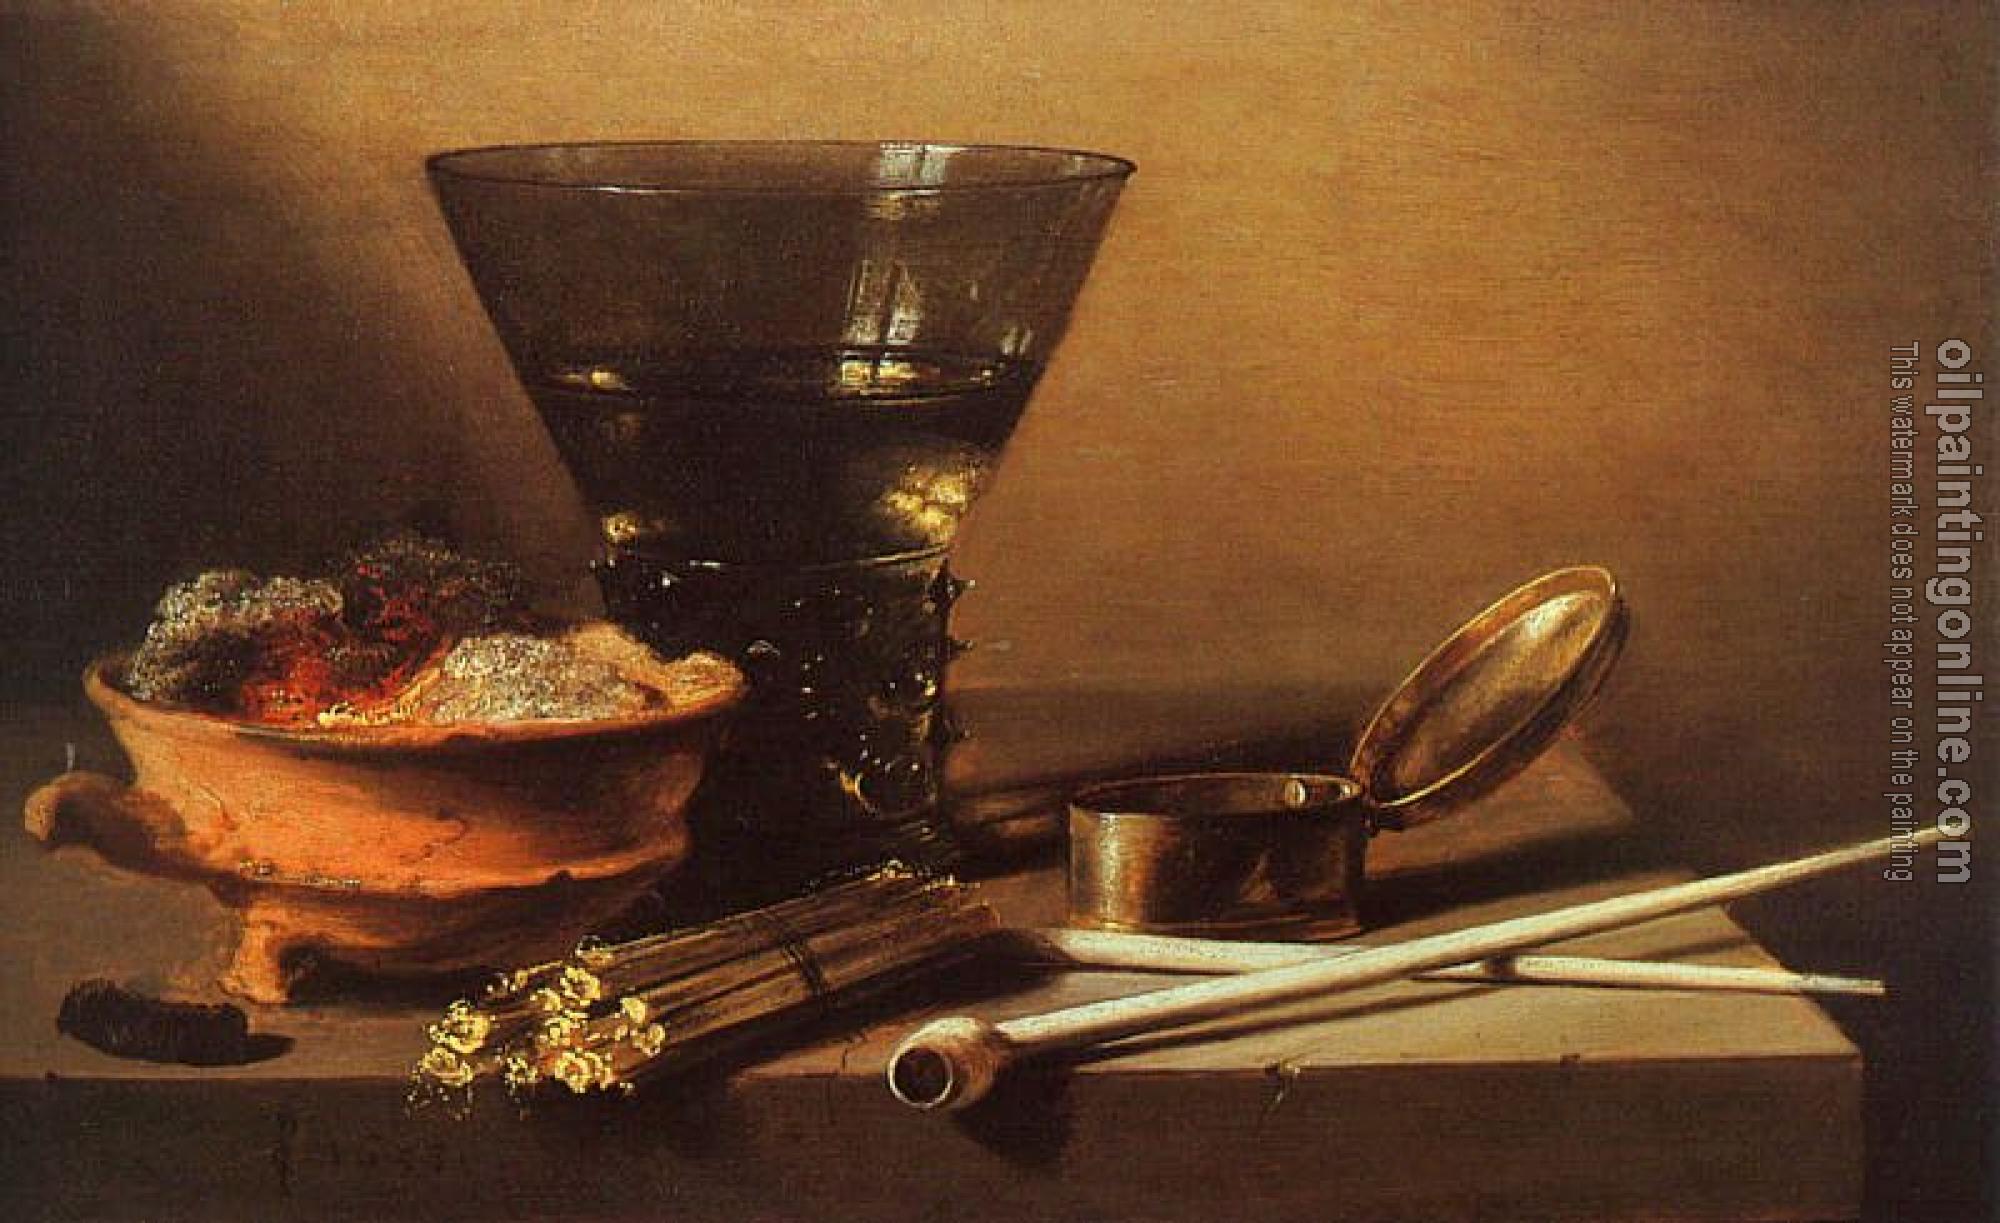 Claesz, Pieter - Still Life with Wine and Smoking Implements